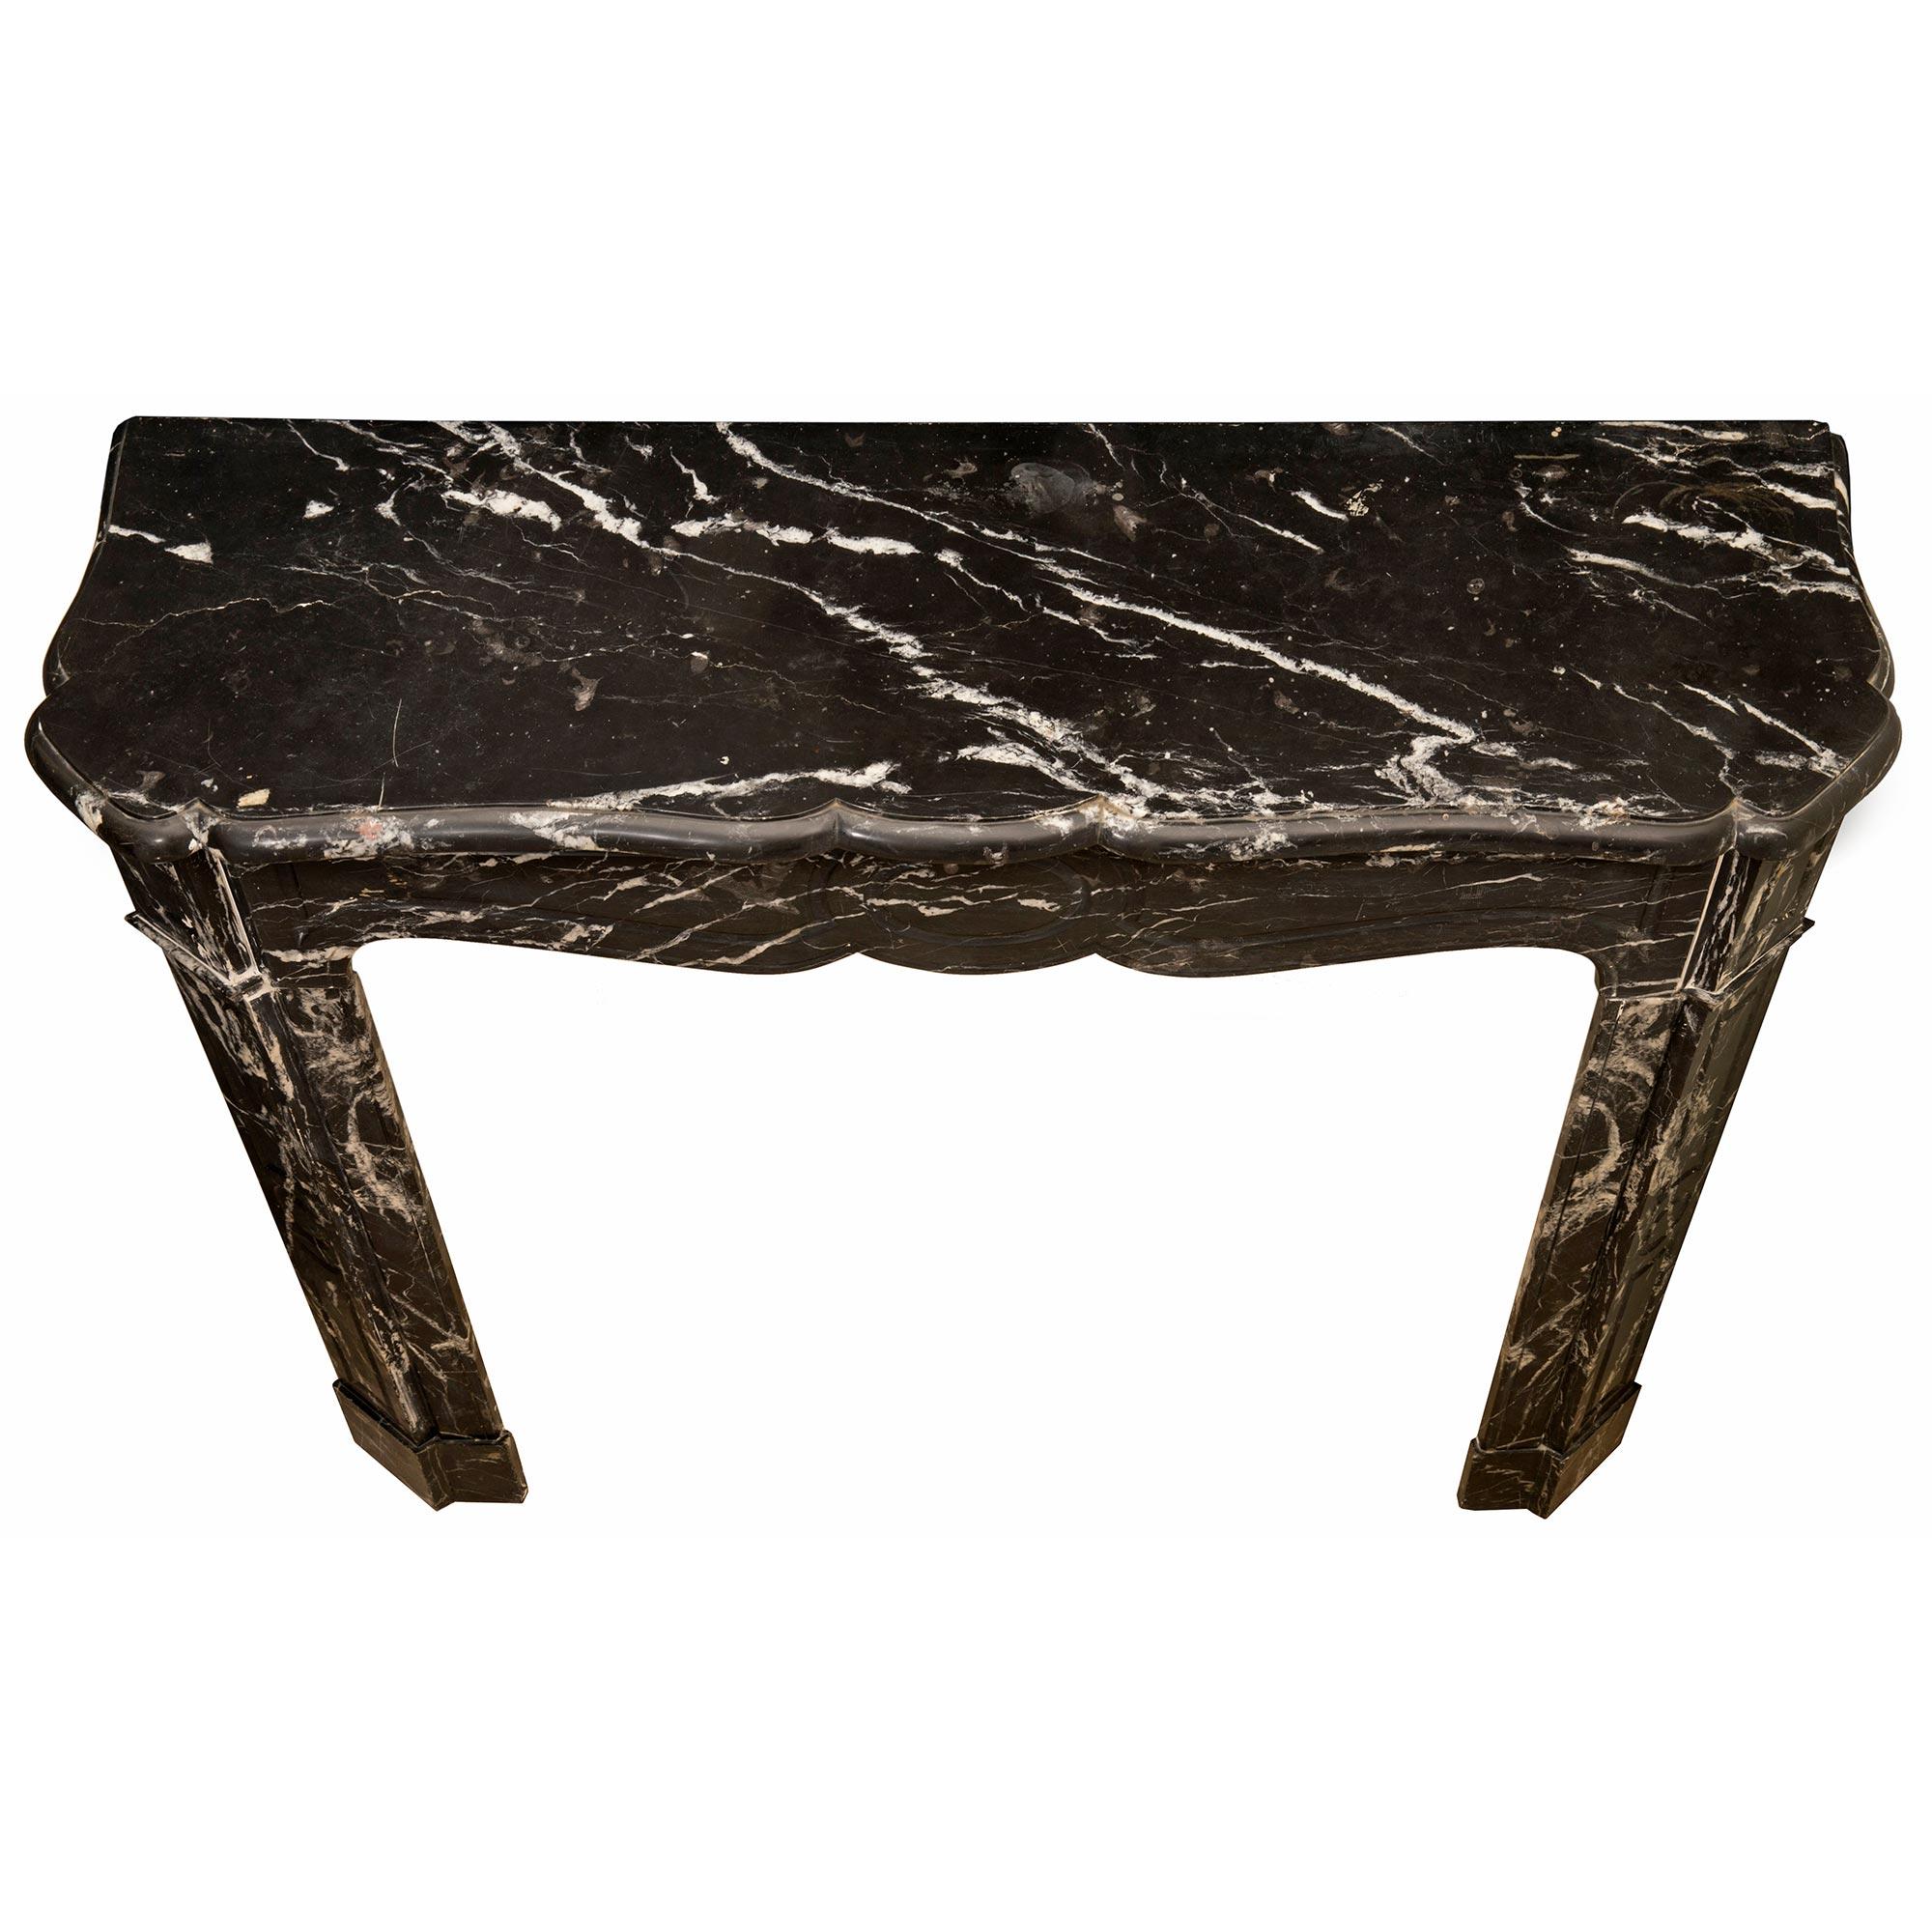 An elegant French 19th century Louis XV st. Noir Antique marble fireplace mantel. The mantel is raised by elegant straight jambs with a mottled base, cut corners and fine circular ormolu air vents. The striking arbalest shaped frieze is centered by